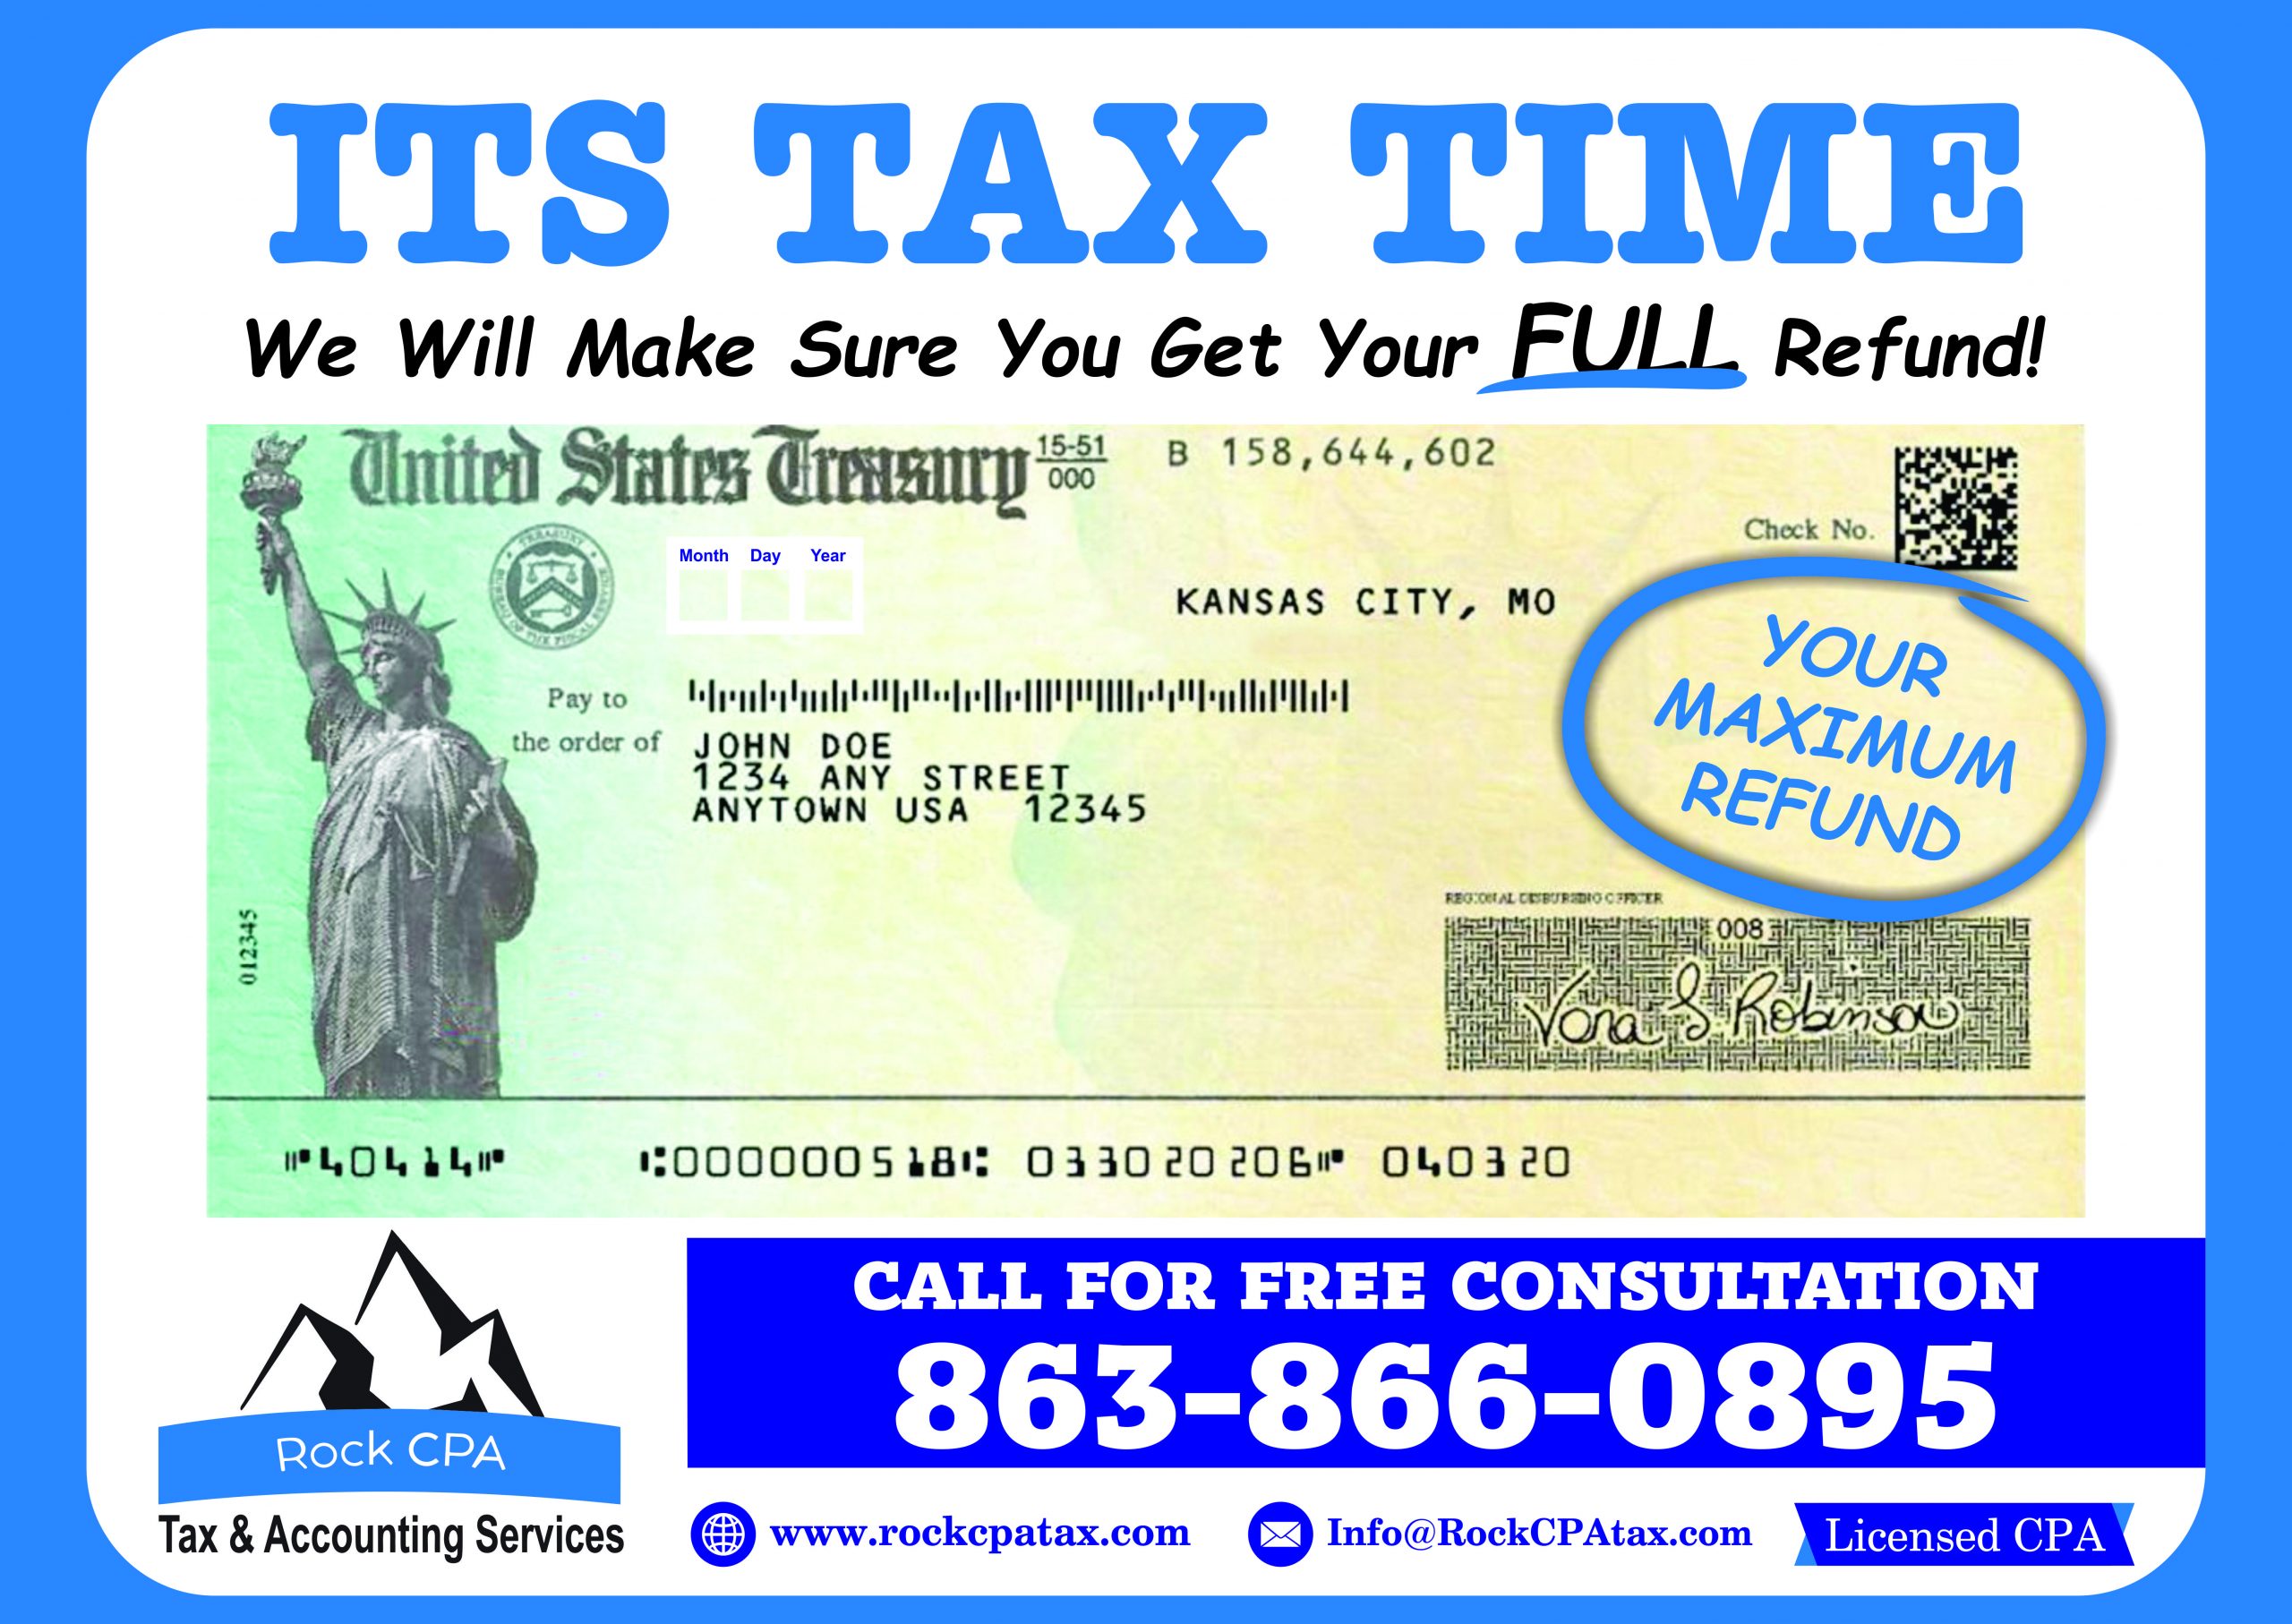 Tax Services for Individuals